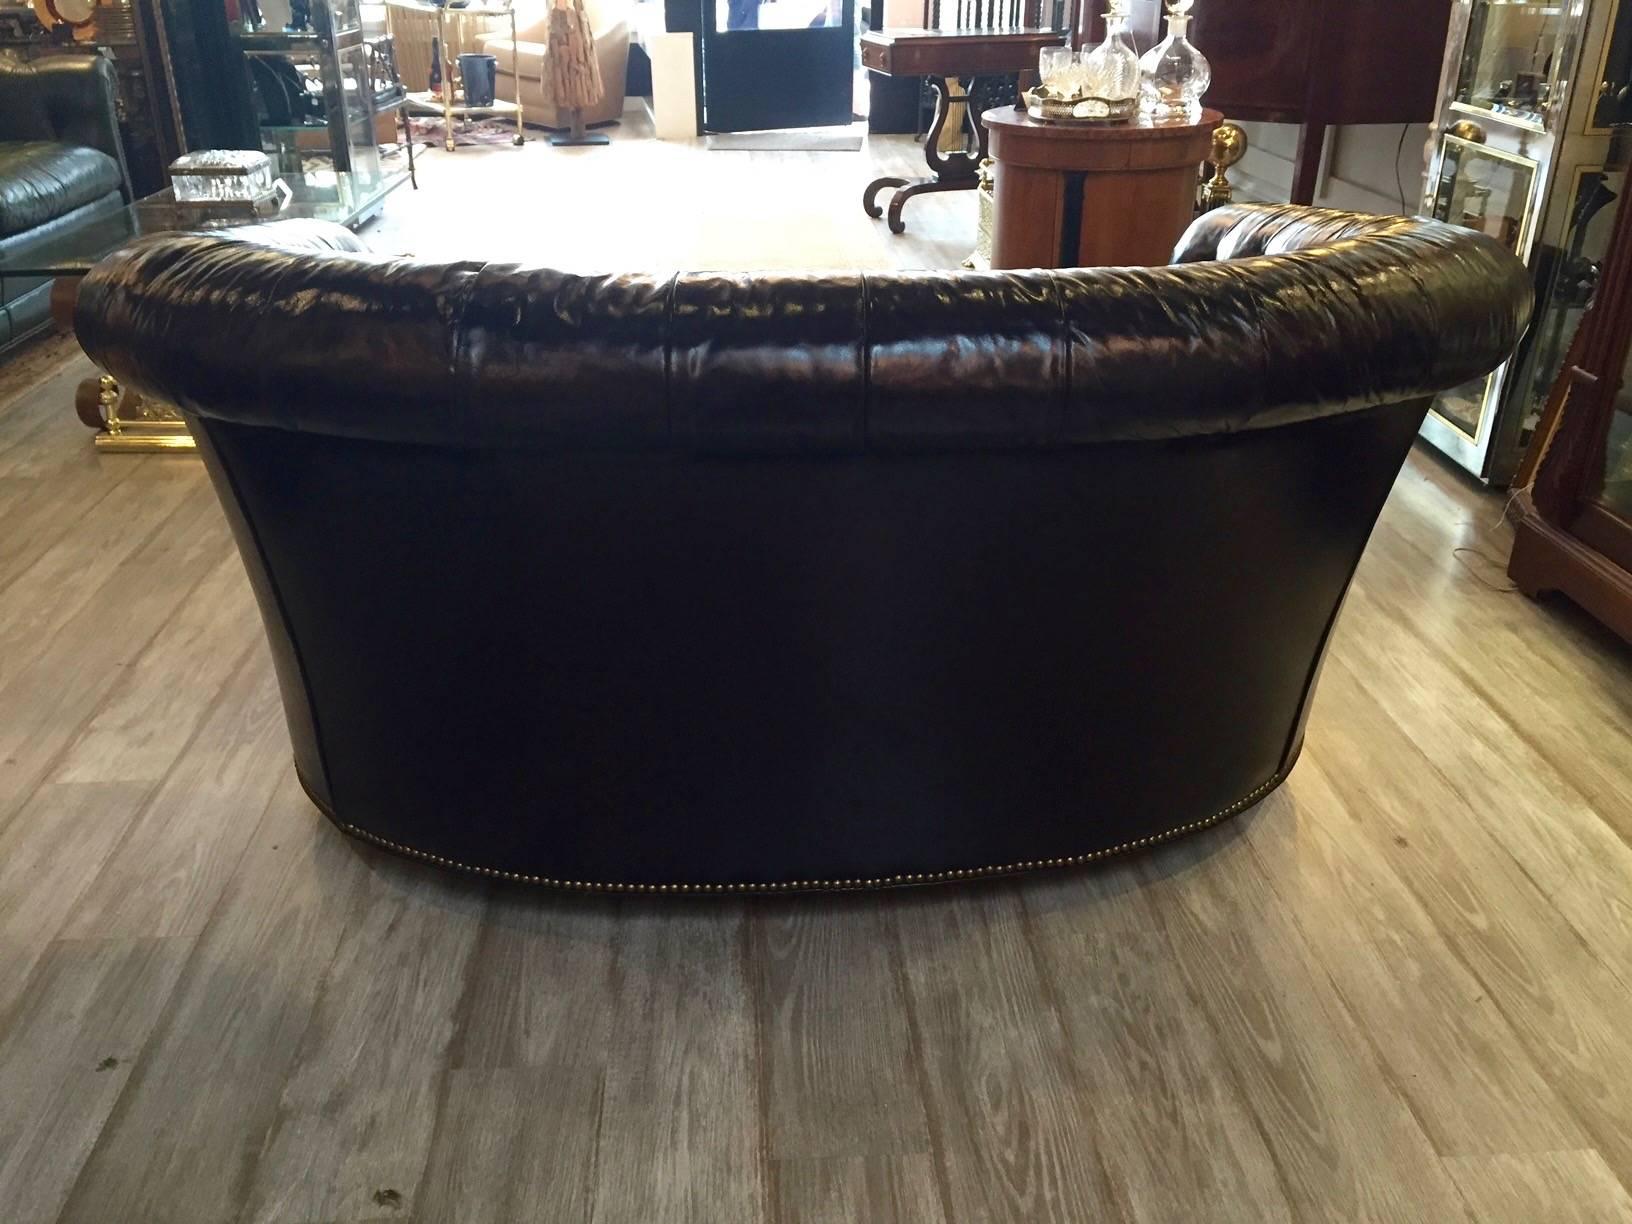 curved leather loveseat